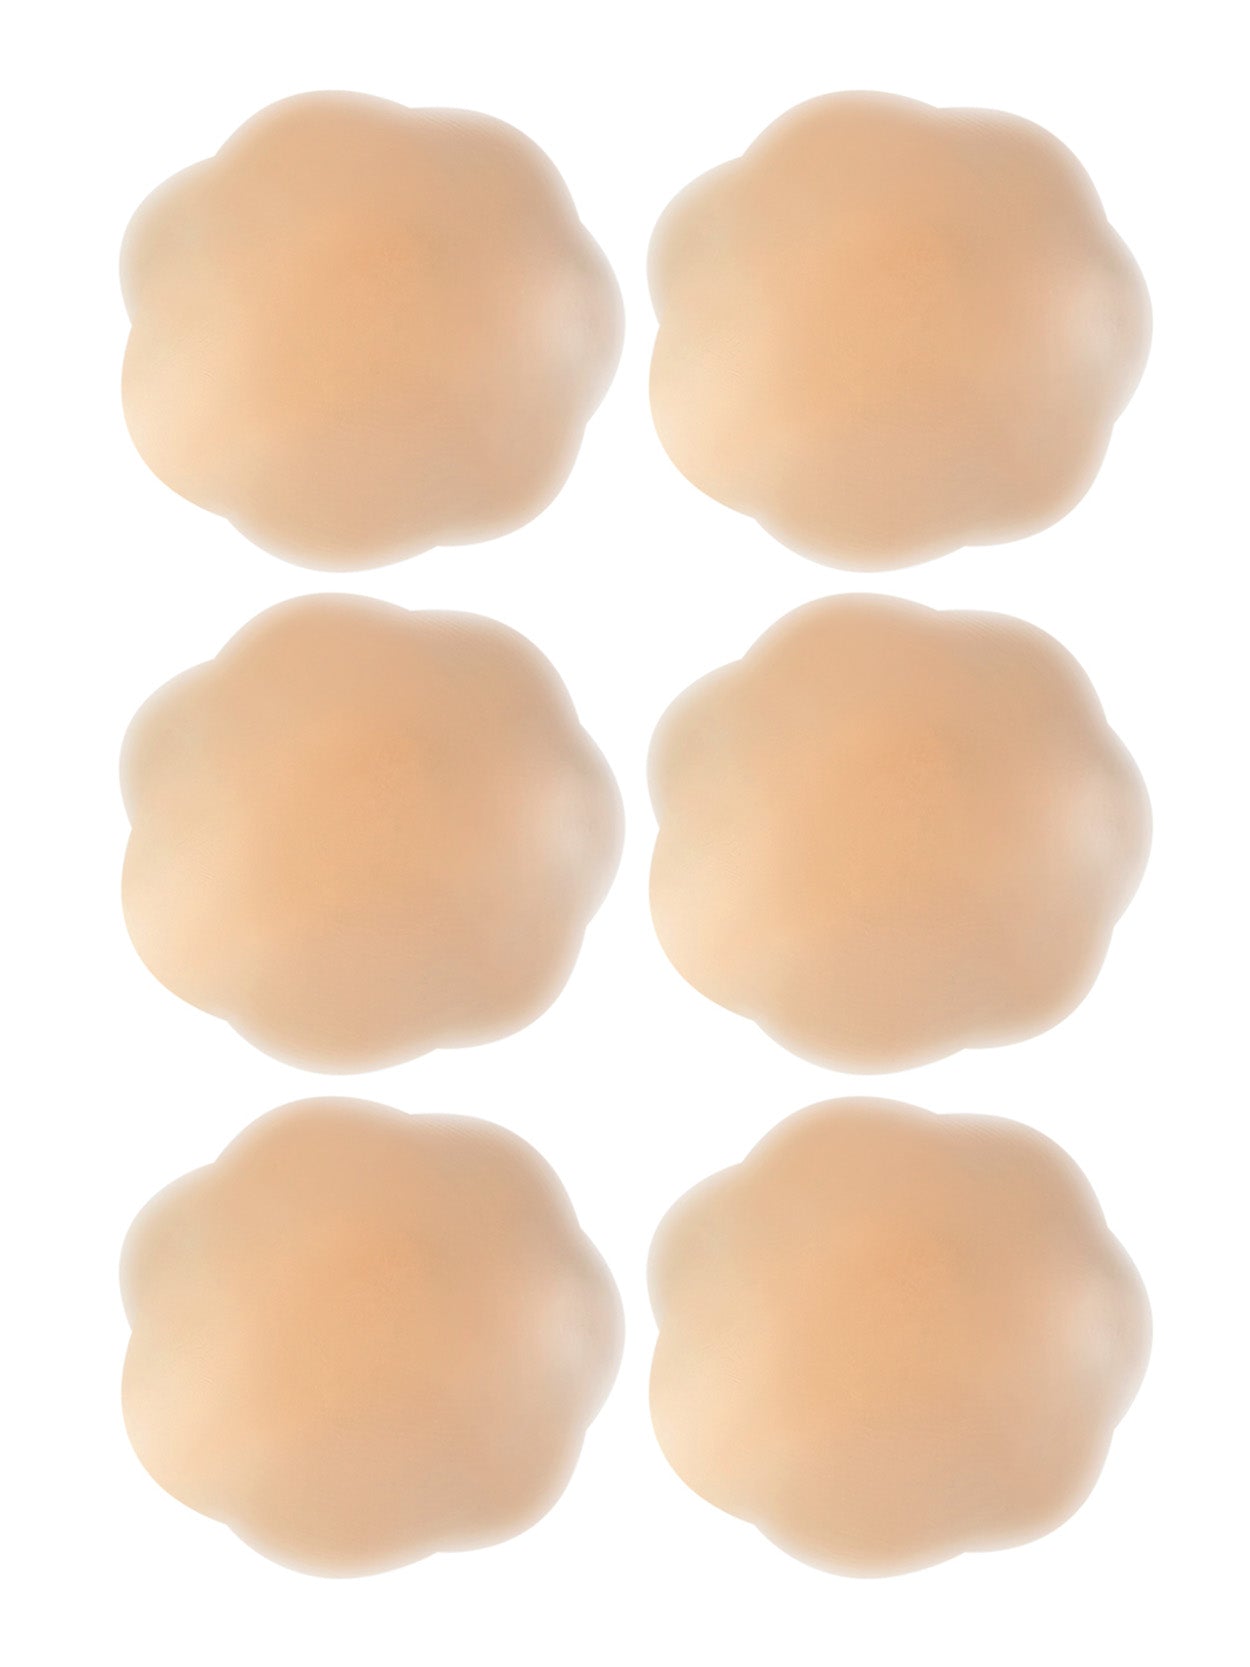 nipple petals silicone nipple covers best